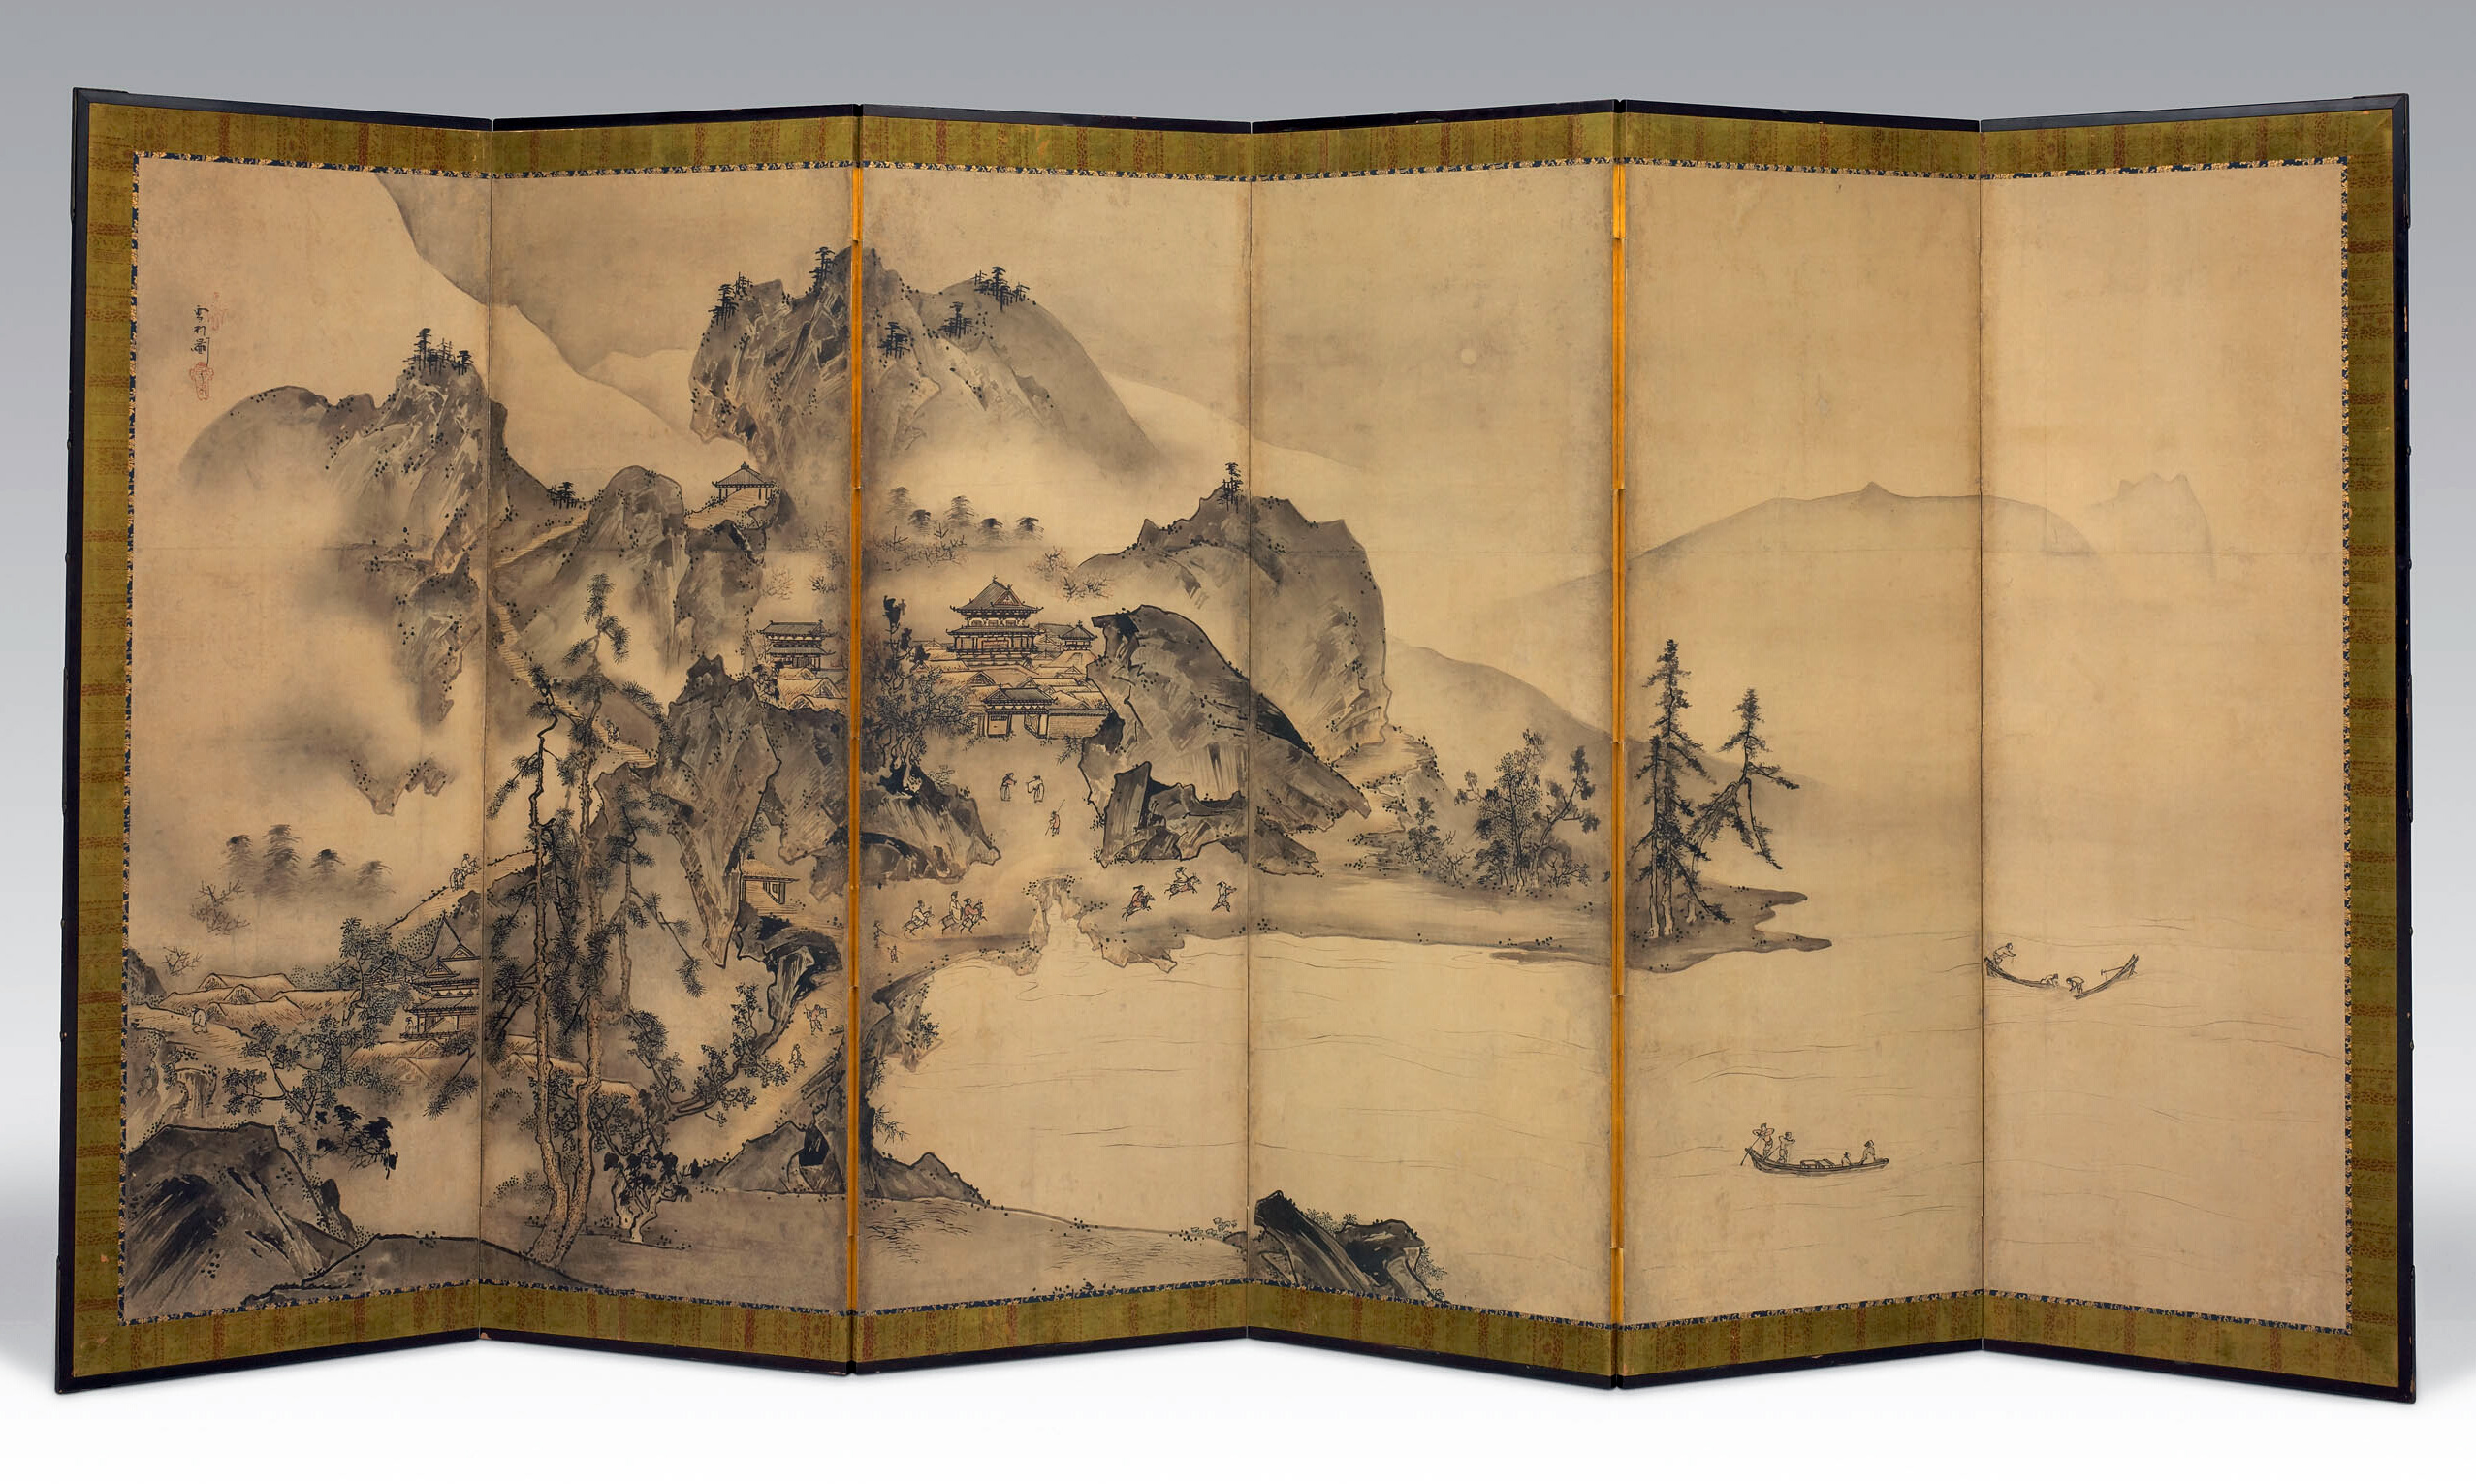 Sesson Shukei, Landscape of the Four Seasons, c. 1560, six-panel screen (one of a pair); ink and light colors on paper, 156.5 cm × 337 cm (Art Institute of Chicago)